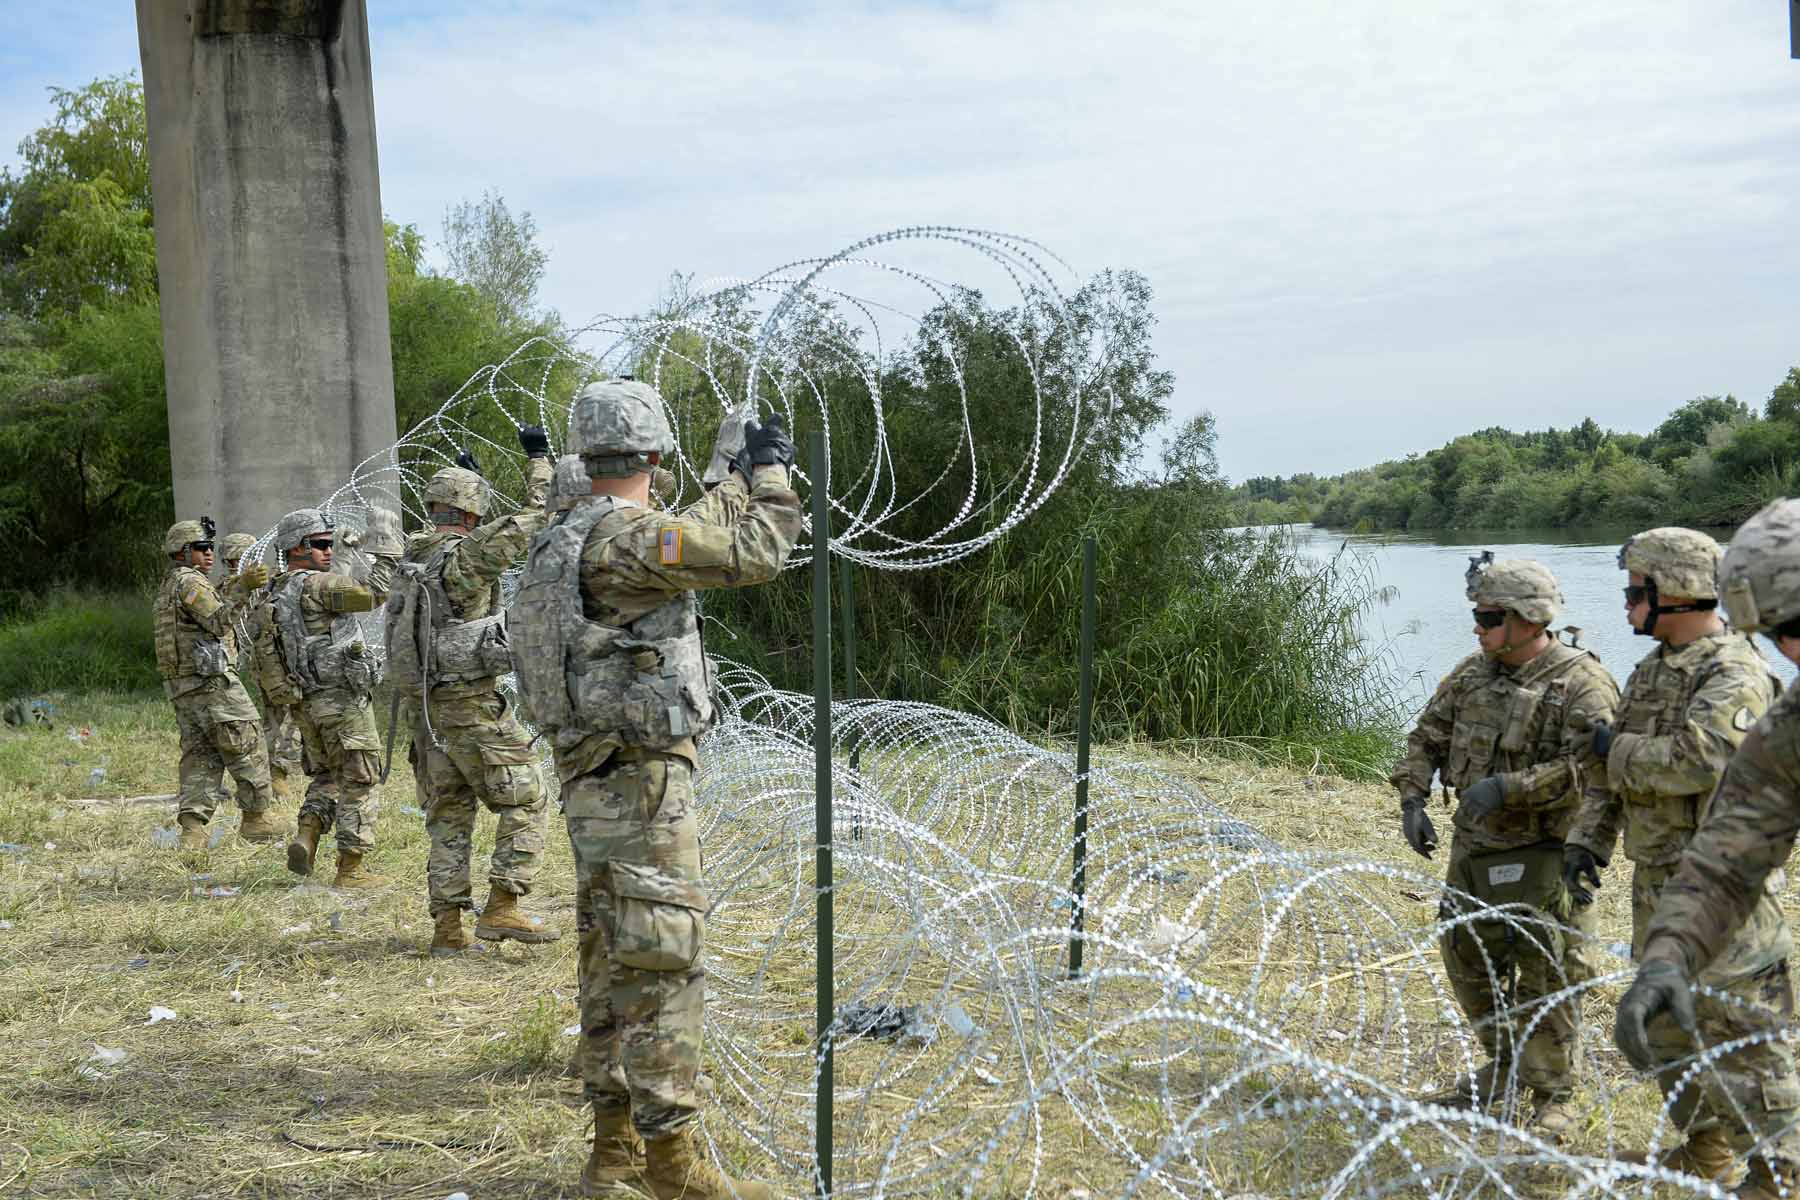 Camp Pendleton Marines will support Border Patrol agents as more